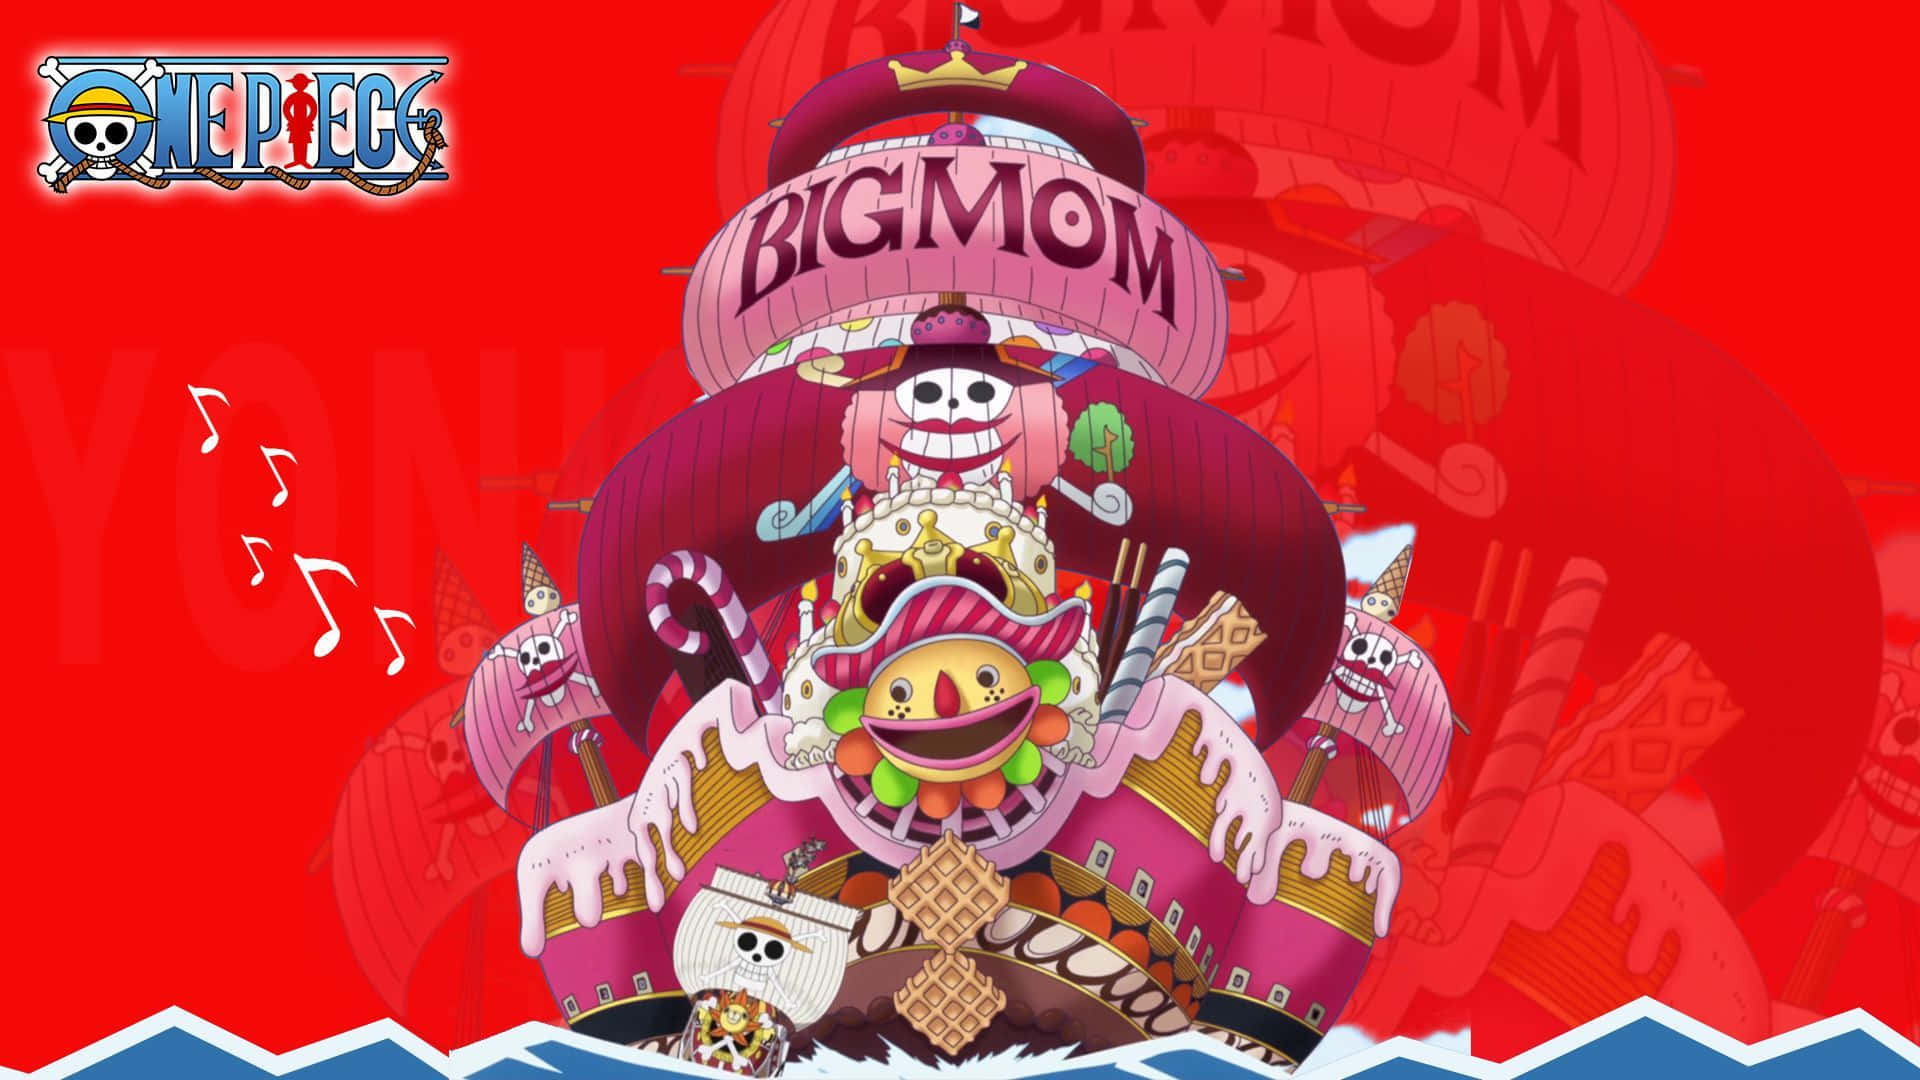 Big Mom, the ruthless, powerful pirate Wallpaper